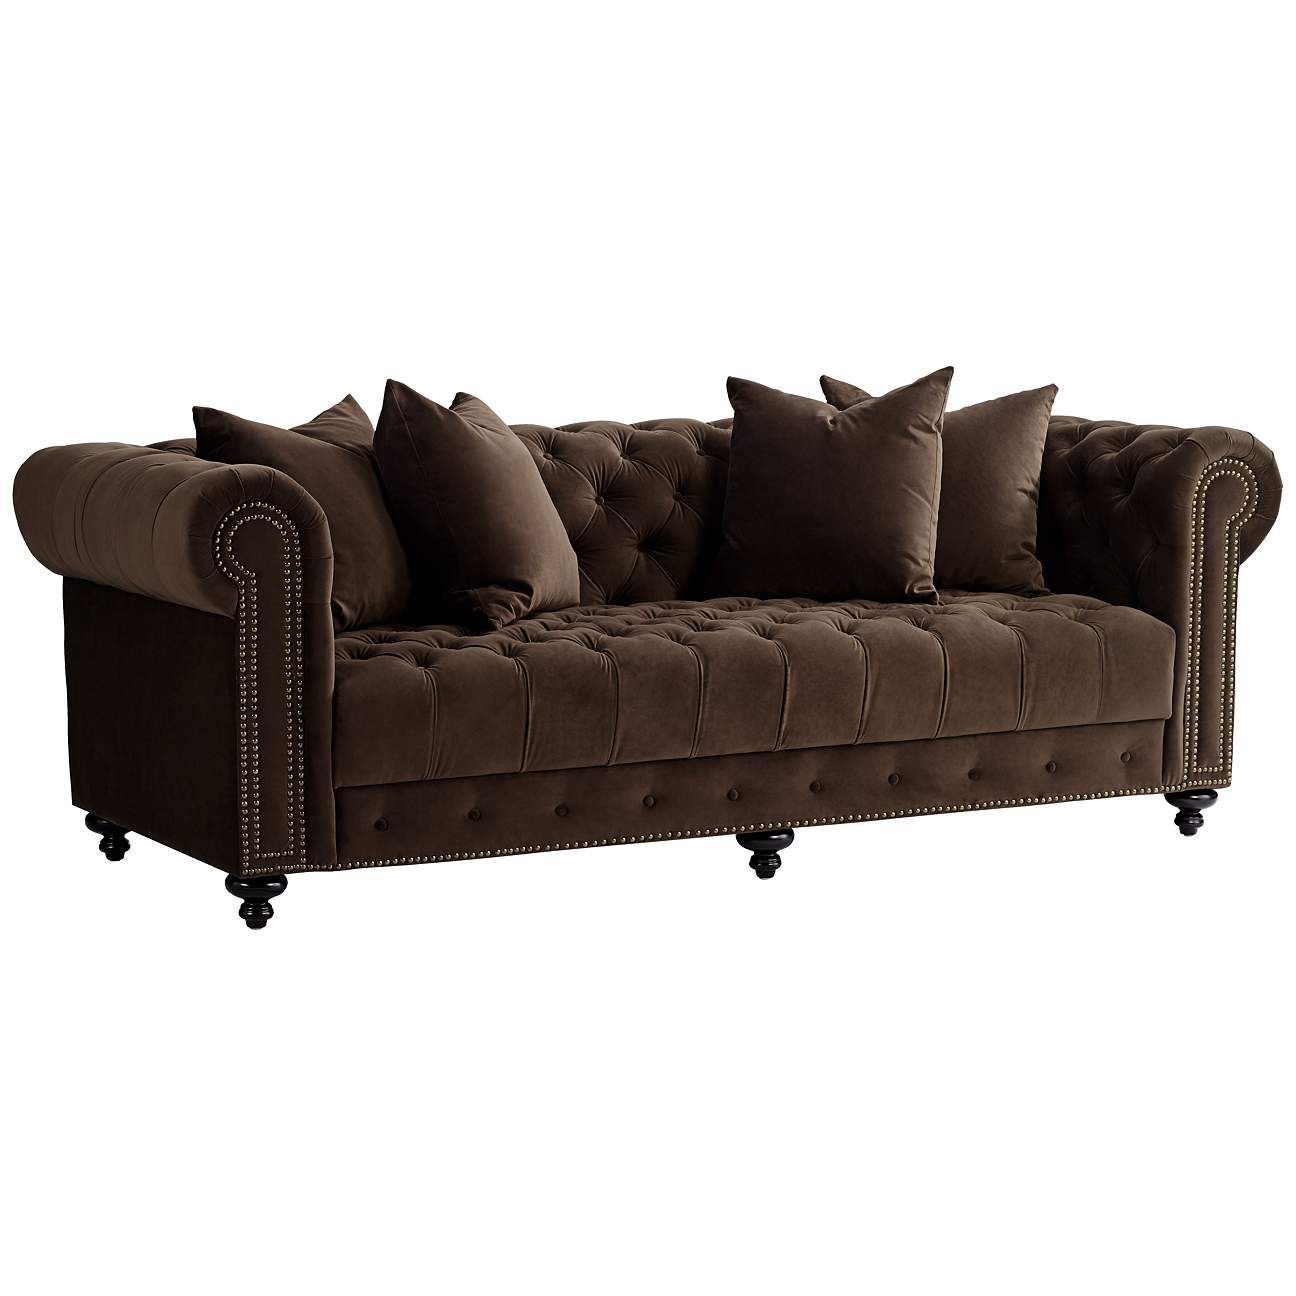 Jules 90"w Chocolate Brown Velvet Tufted Chesterfield Sofa – #58j03 Throughout Sofas In Chocolate Brown (View 3 of 20)